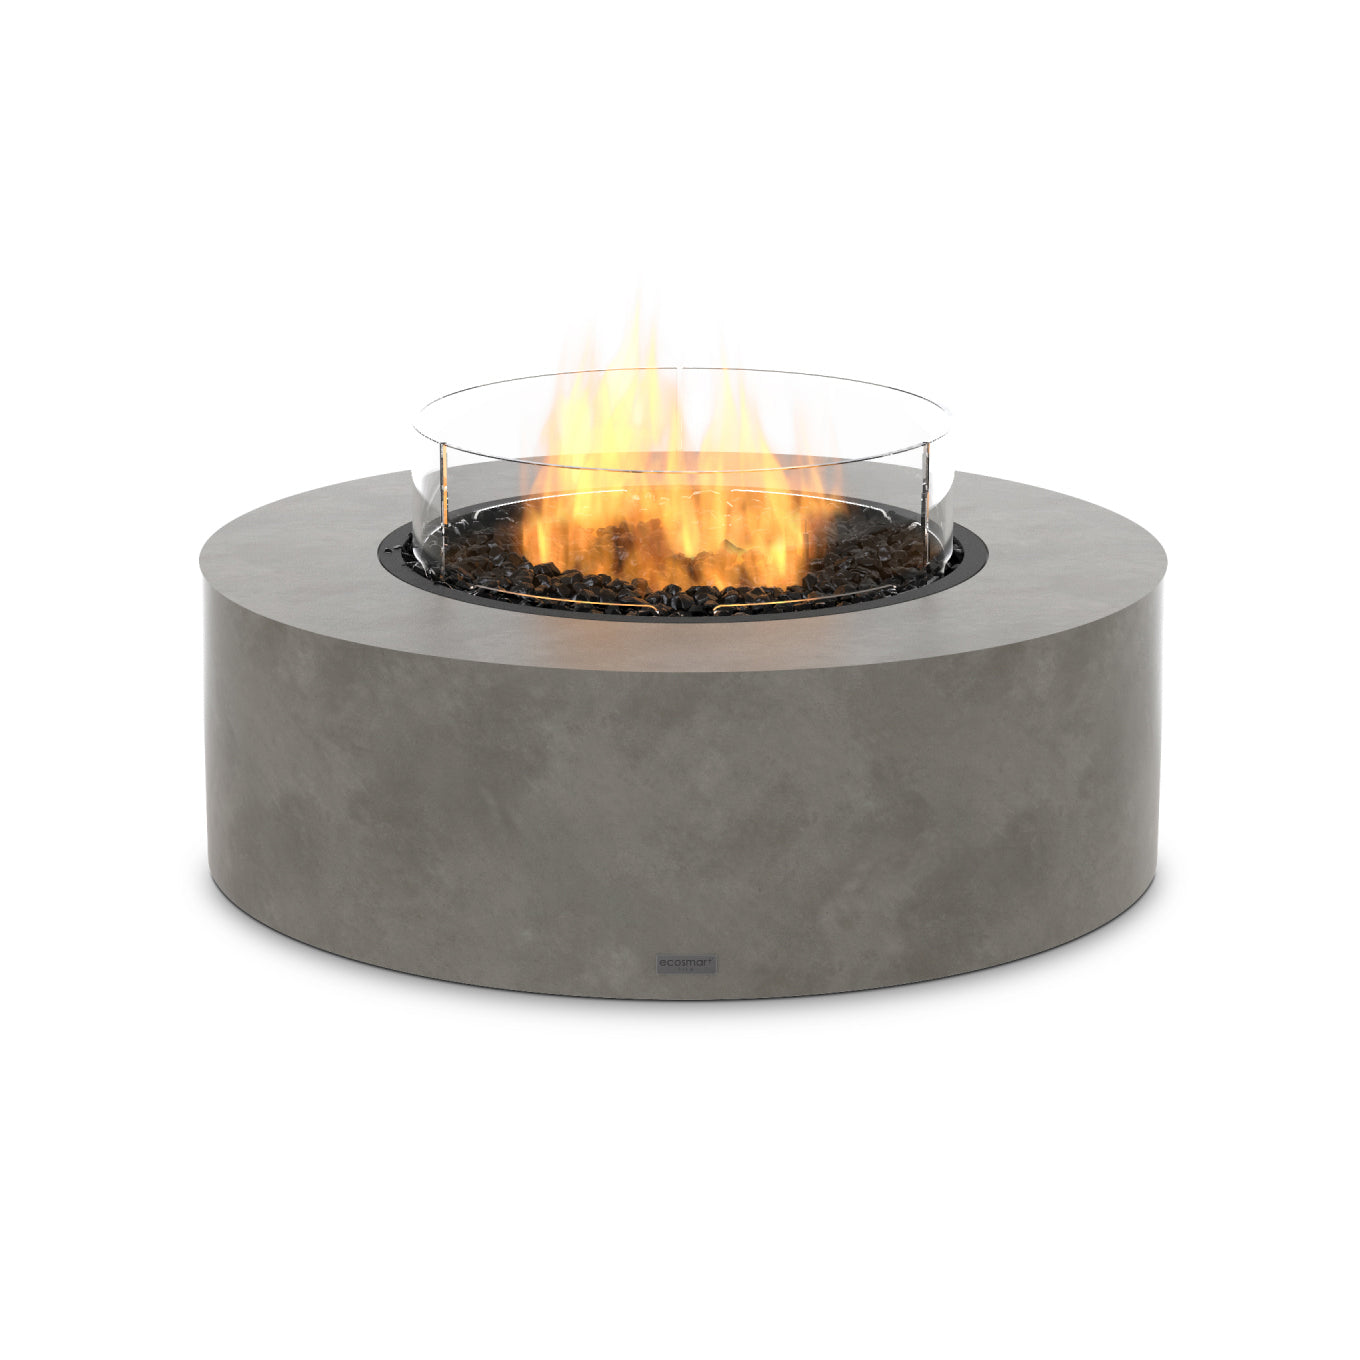 ARK 40 FIRE PIT TABLE - NATURAL GAS / LIQUID PROPANE